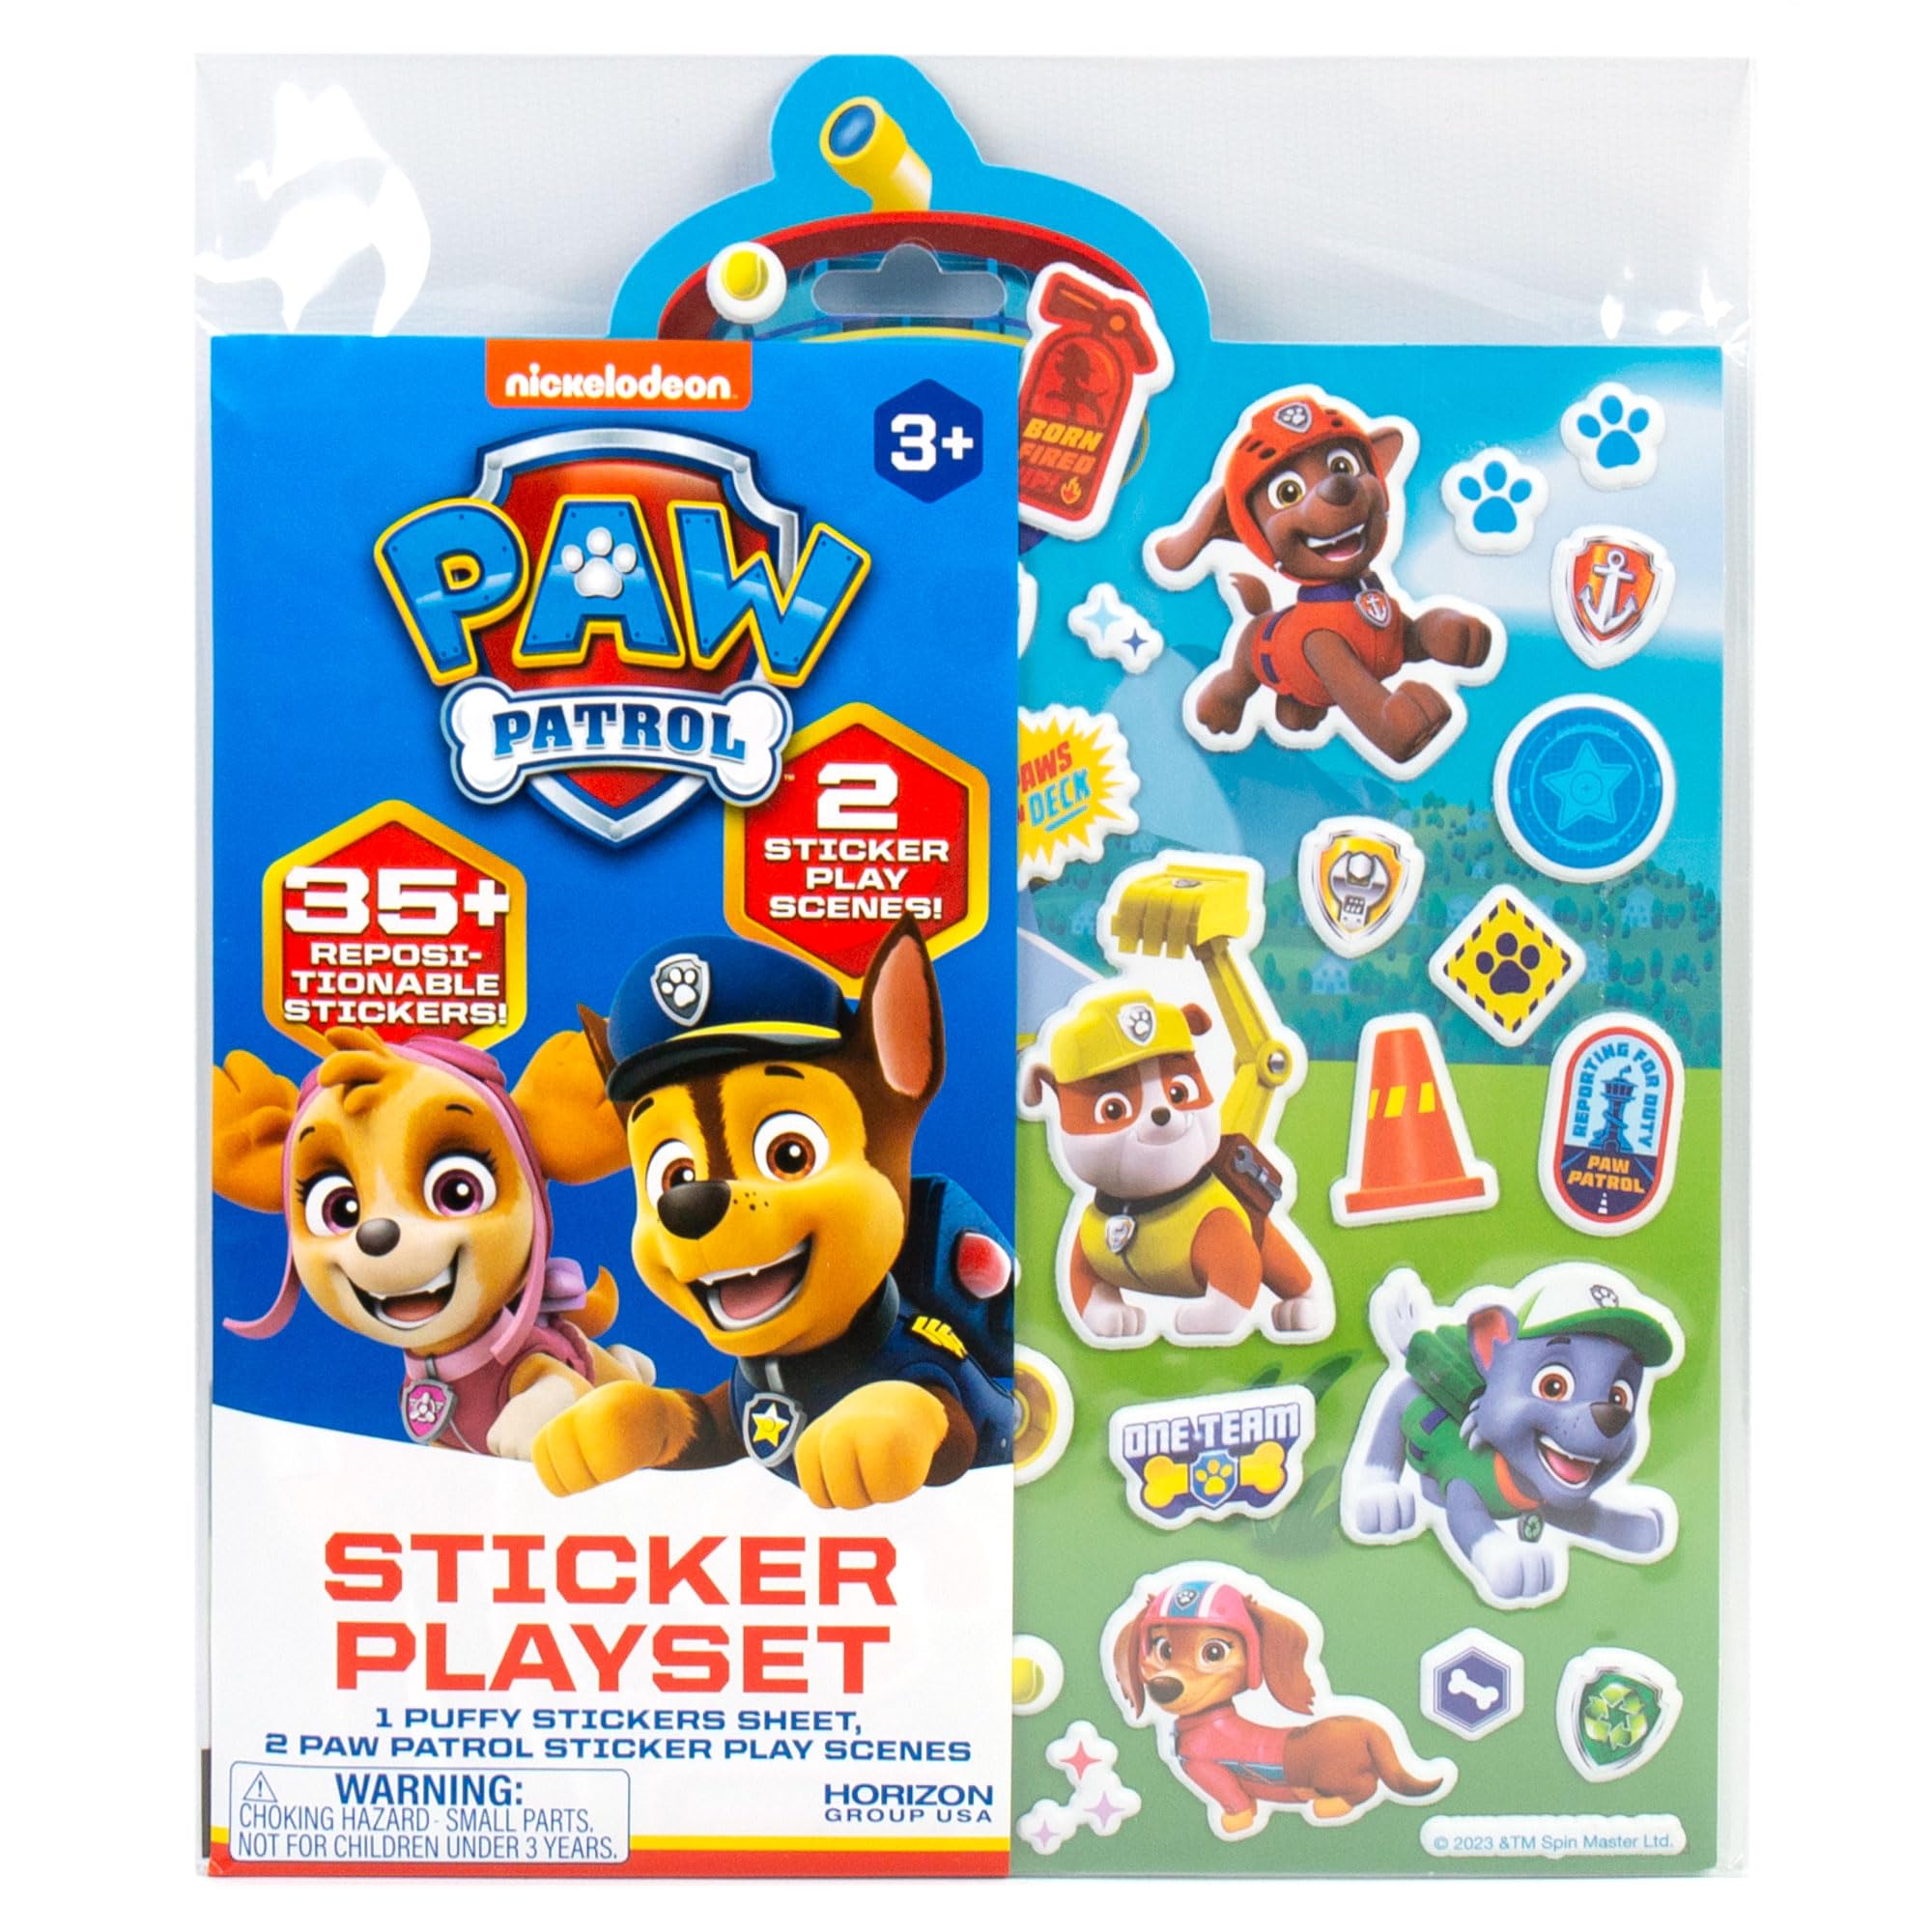 Paw Patrol Sticker Playset, Over 50 Repositionable Paw Patrol Stickers, 2 Sticker Play Scenes, Paw Patrol Party Activities, Paw Patrol Car Activity, Travel Activity for Kids & Toddlers